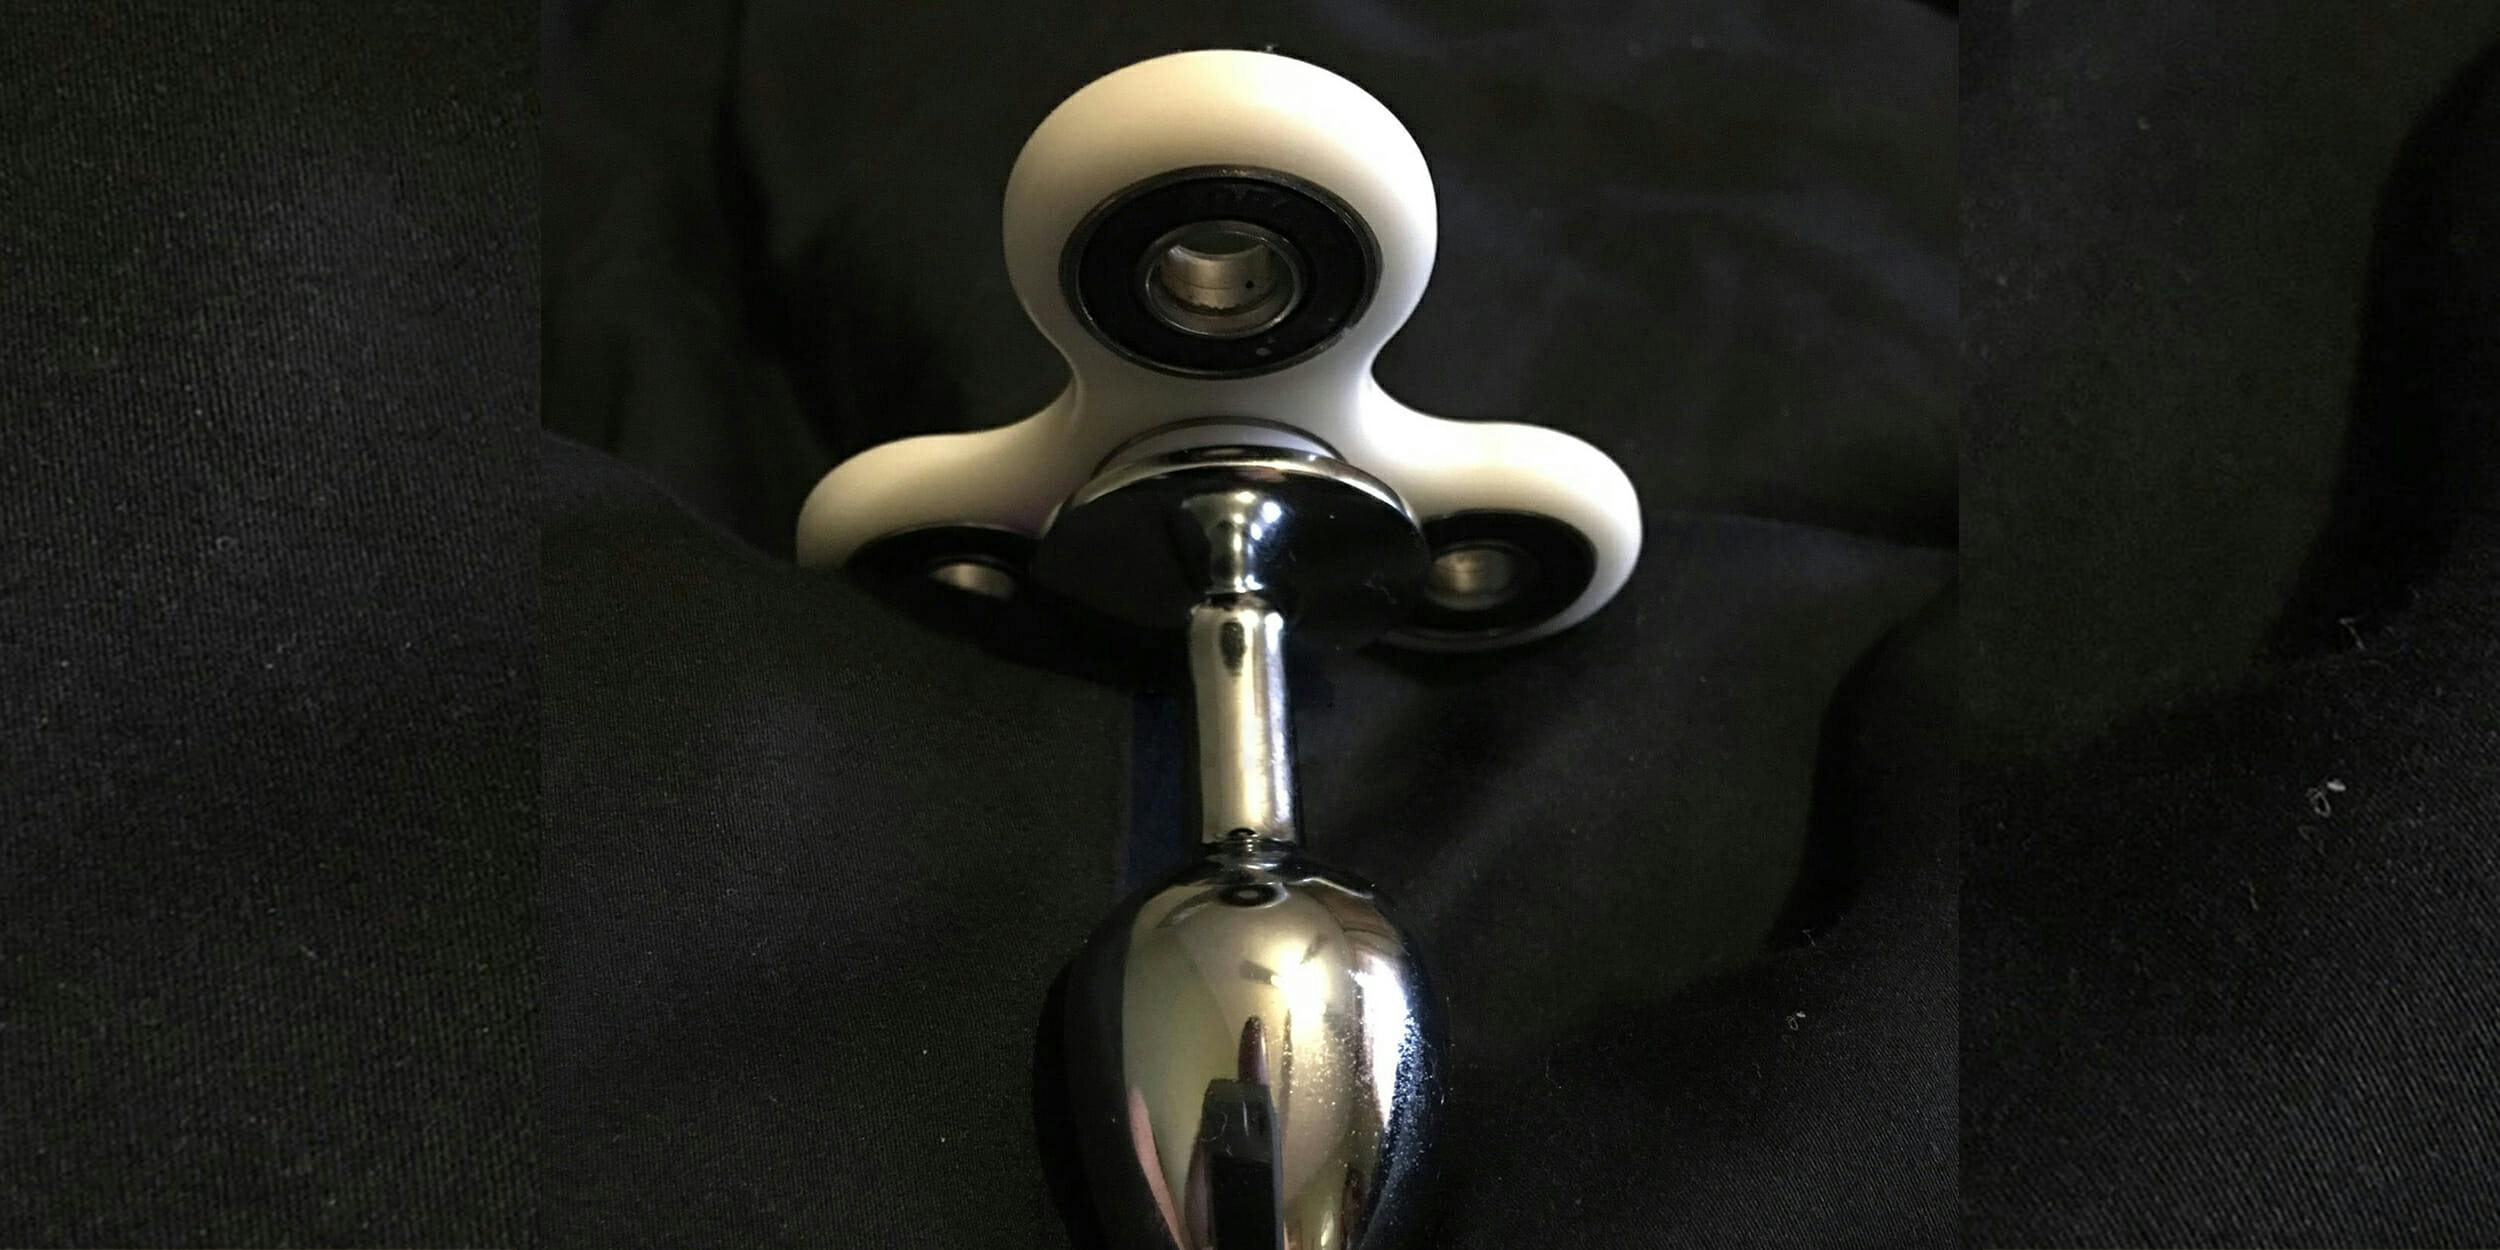 are bored by both fidget spinners an butt plugs, you can combine the two by...